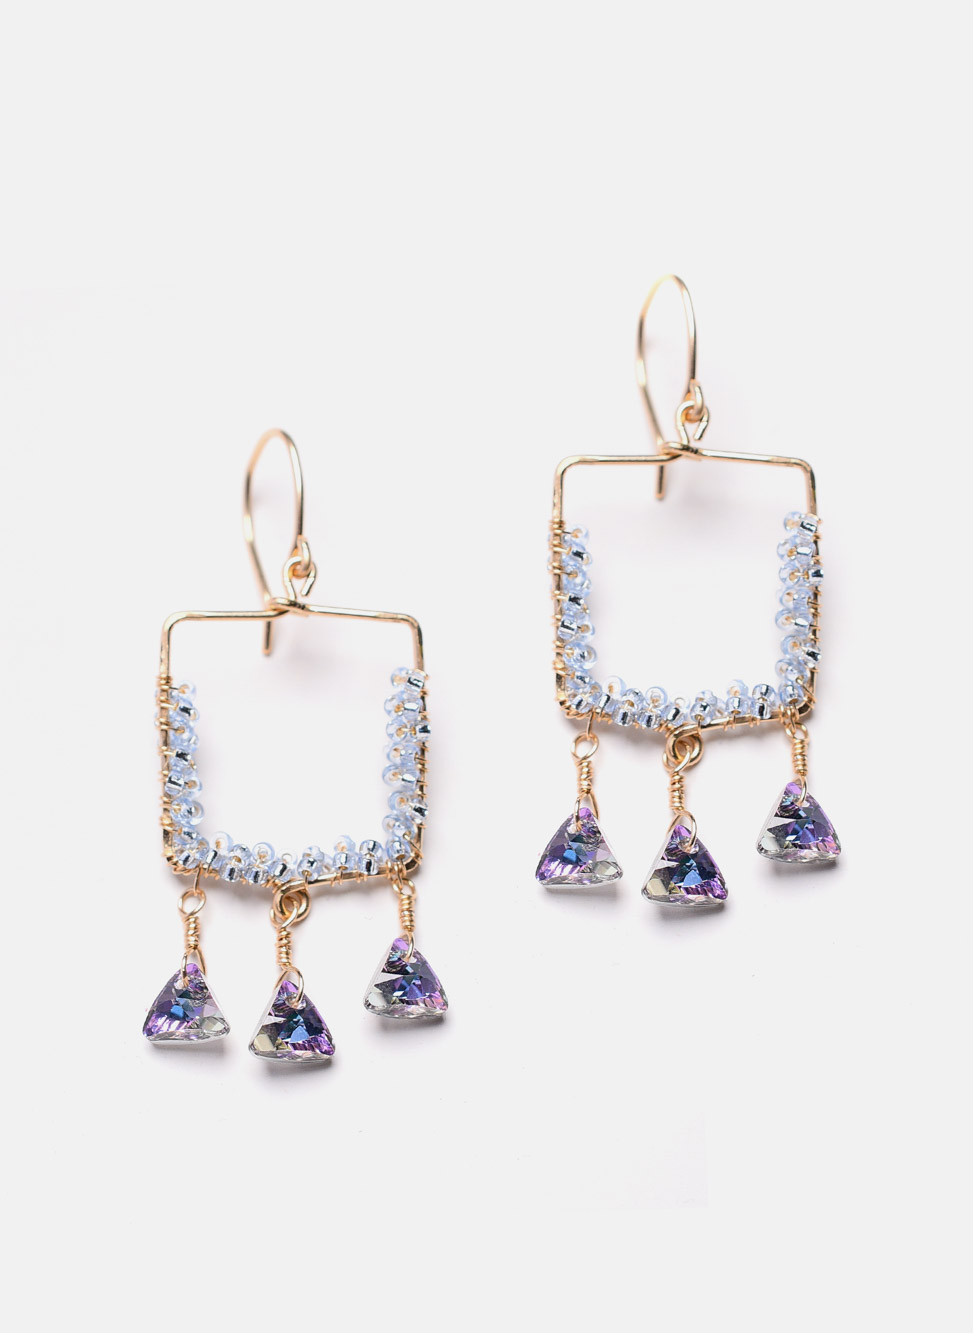 14k gold filled earrings with colorful crystals and blue beads